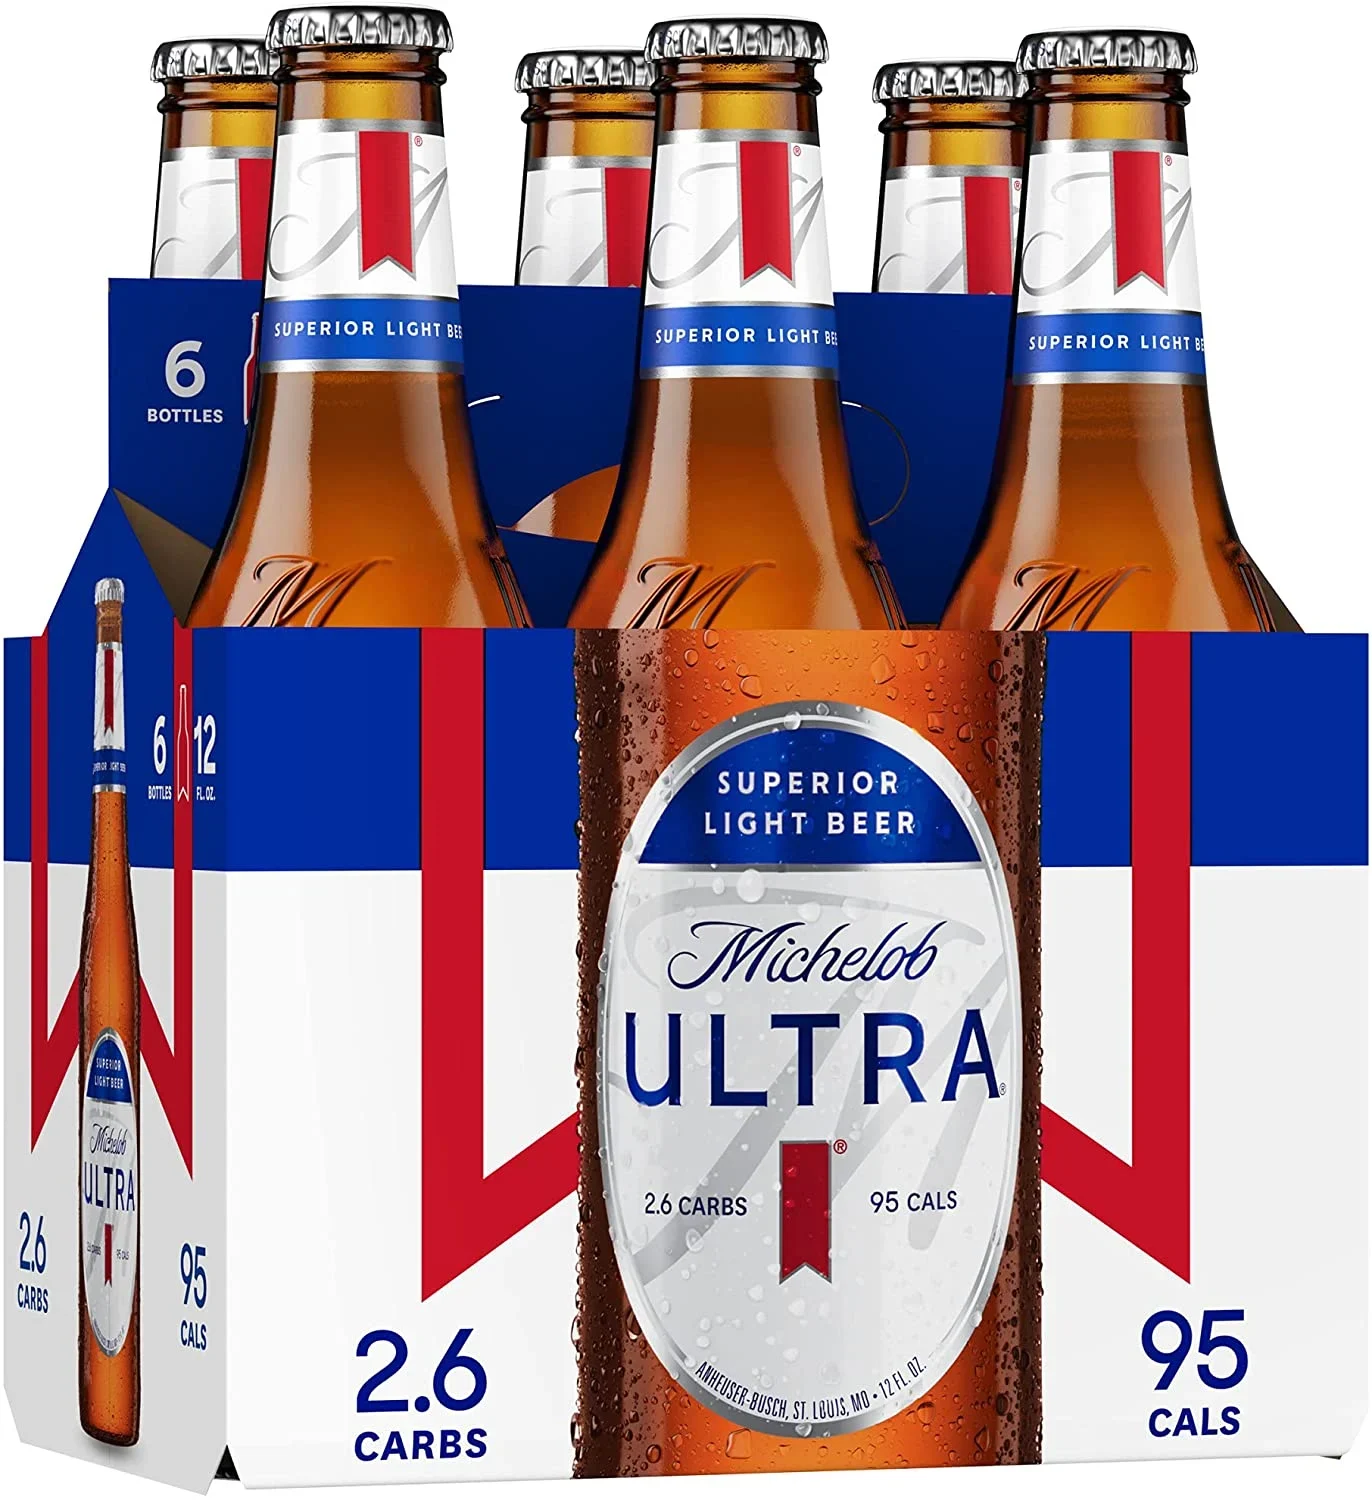 Is Michelob Ultra The Healthiest Beer